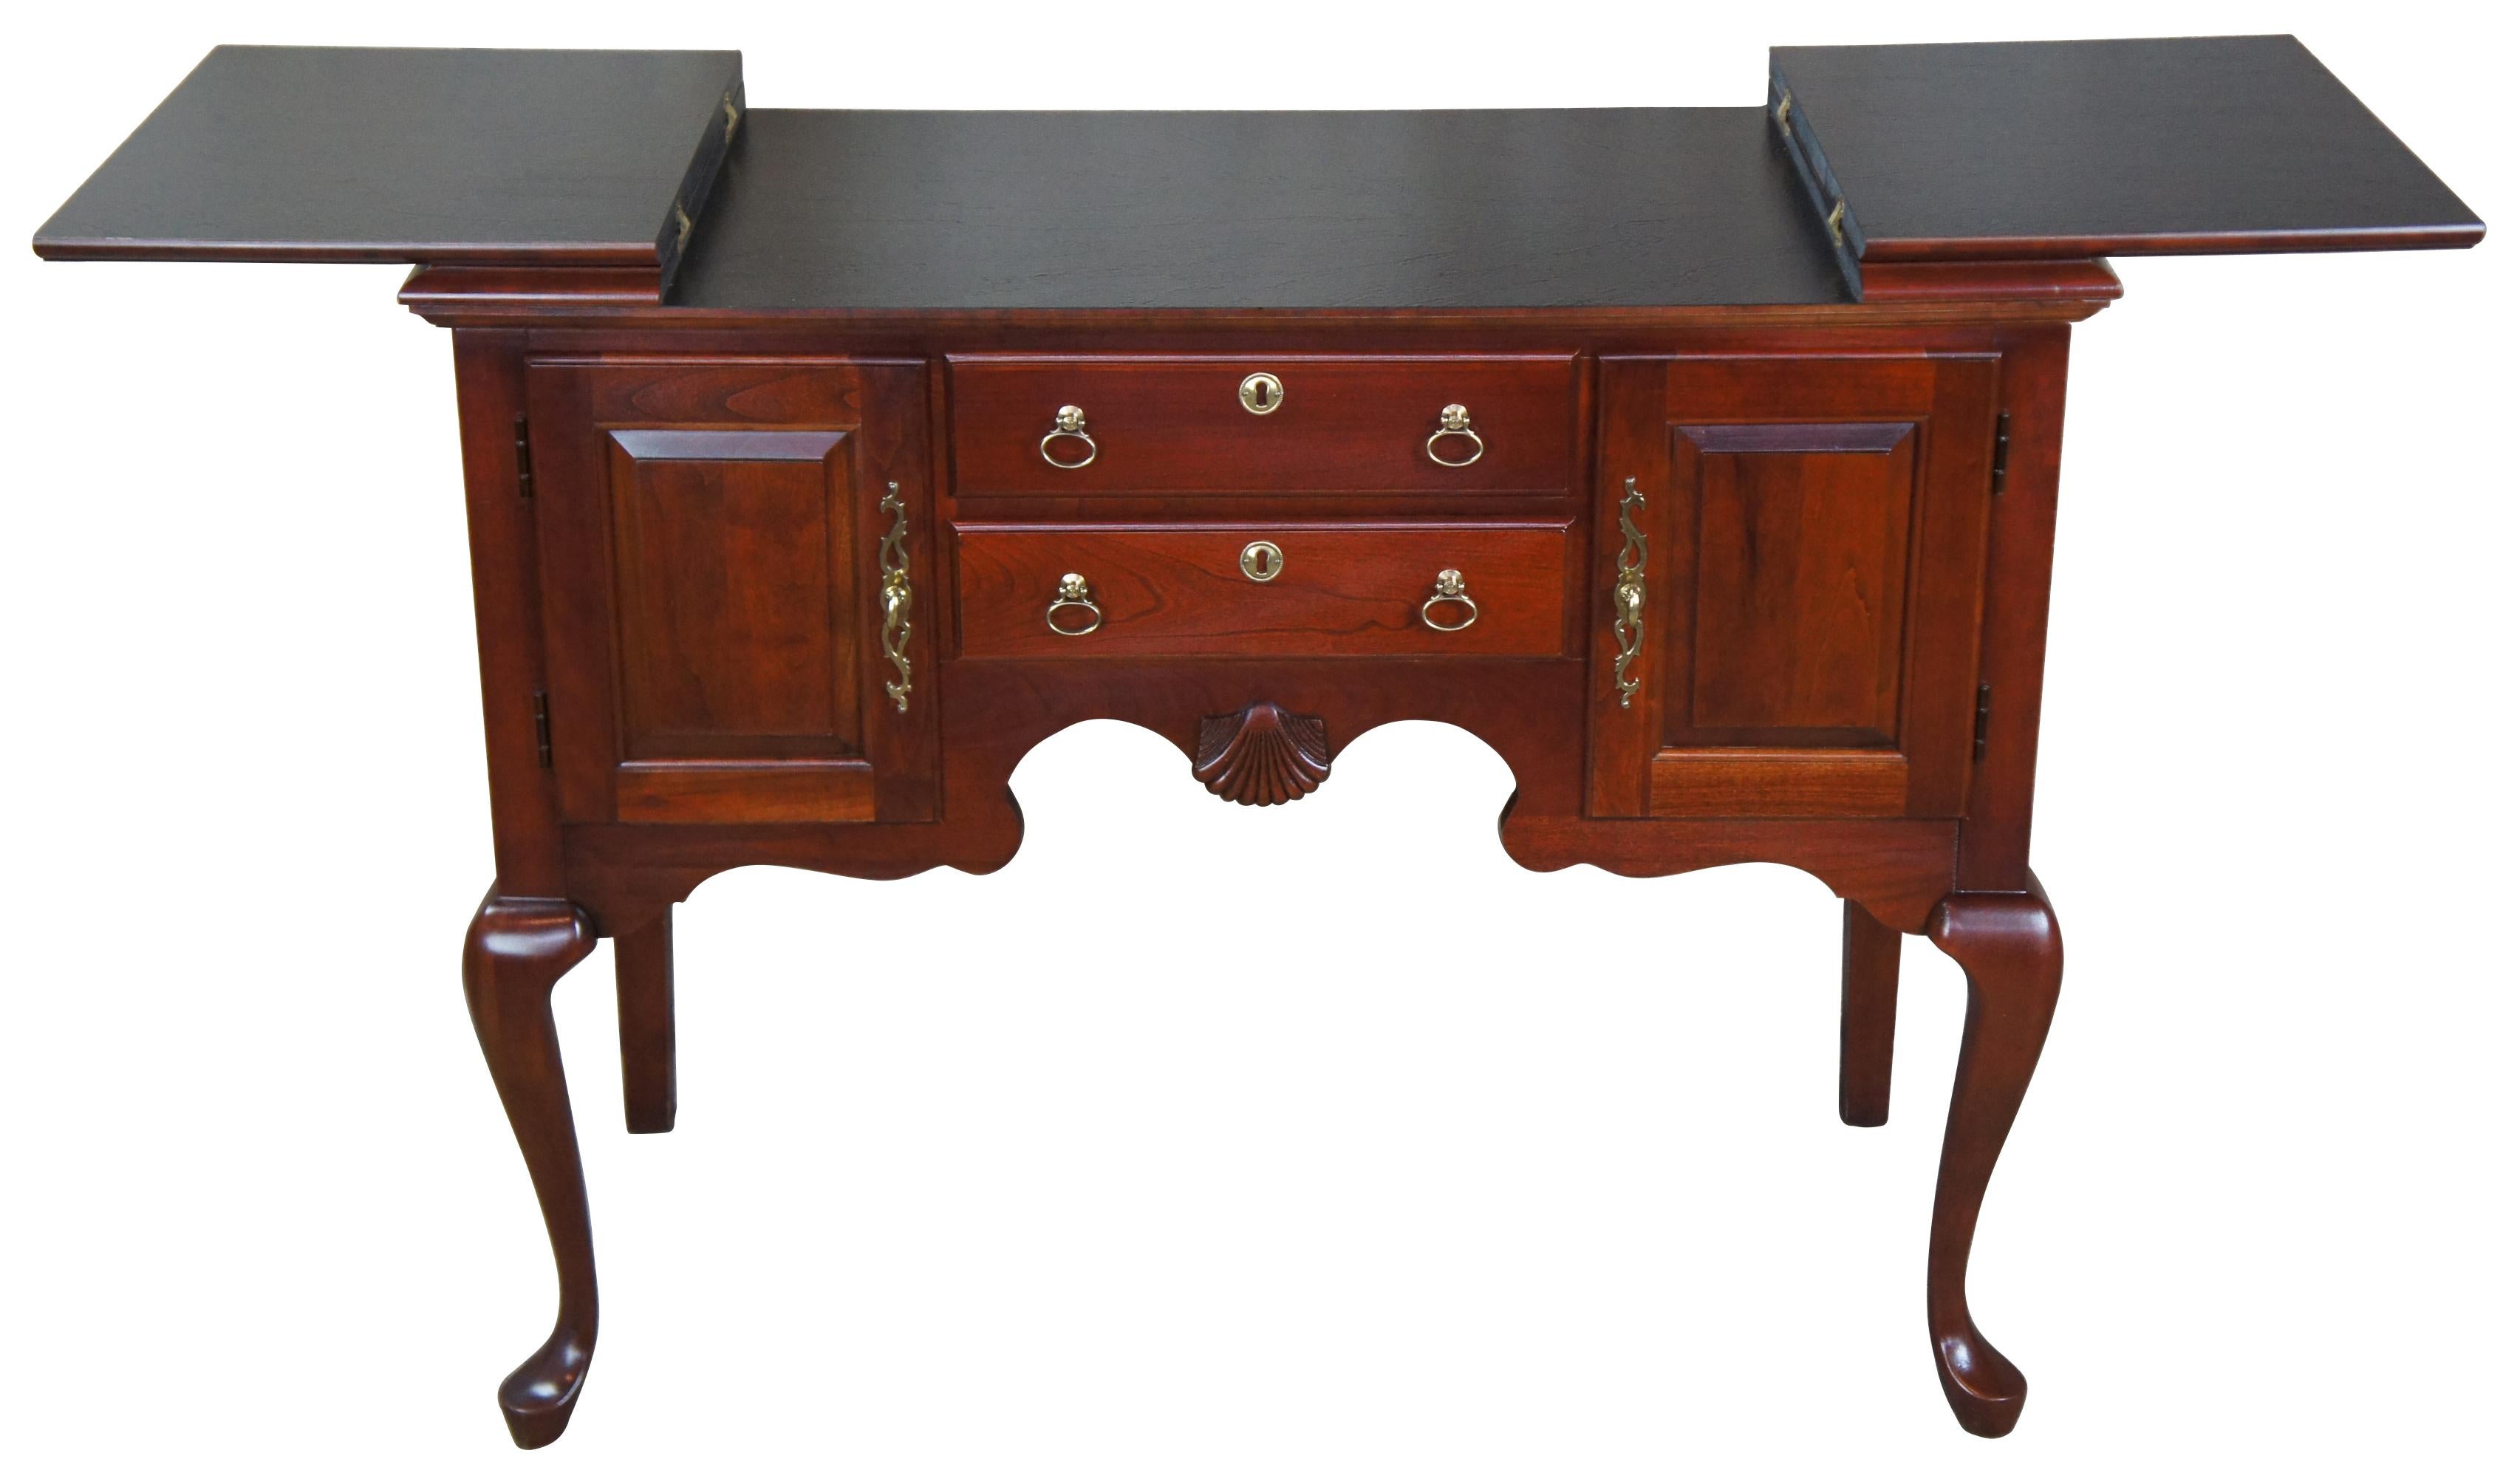 Vintage Pennsylvania House flip top cherry buffet or server. Features 18th century design made of solid cherry construction with traditional Queen Anne styling, raised panel cabinet doors with dovetailed drawers, brass hardware, and felt lined